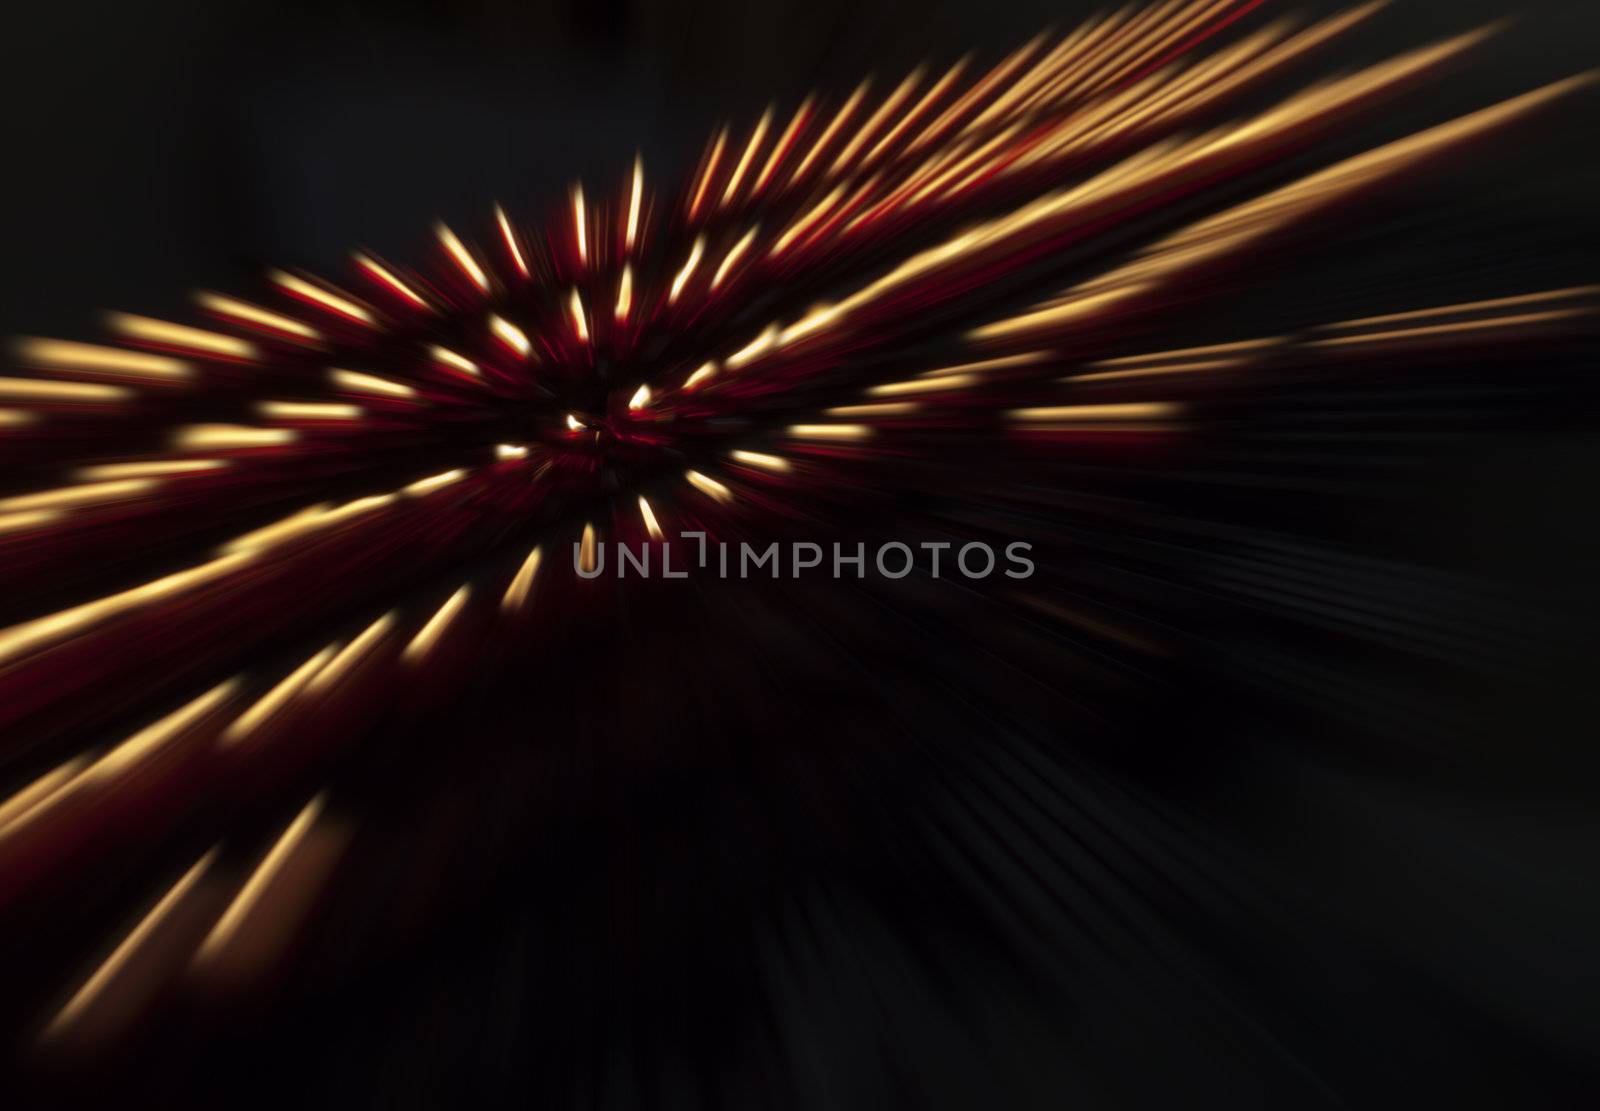 An image of a zoom into lights